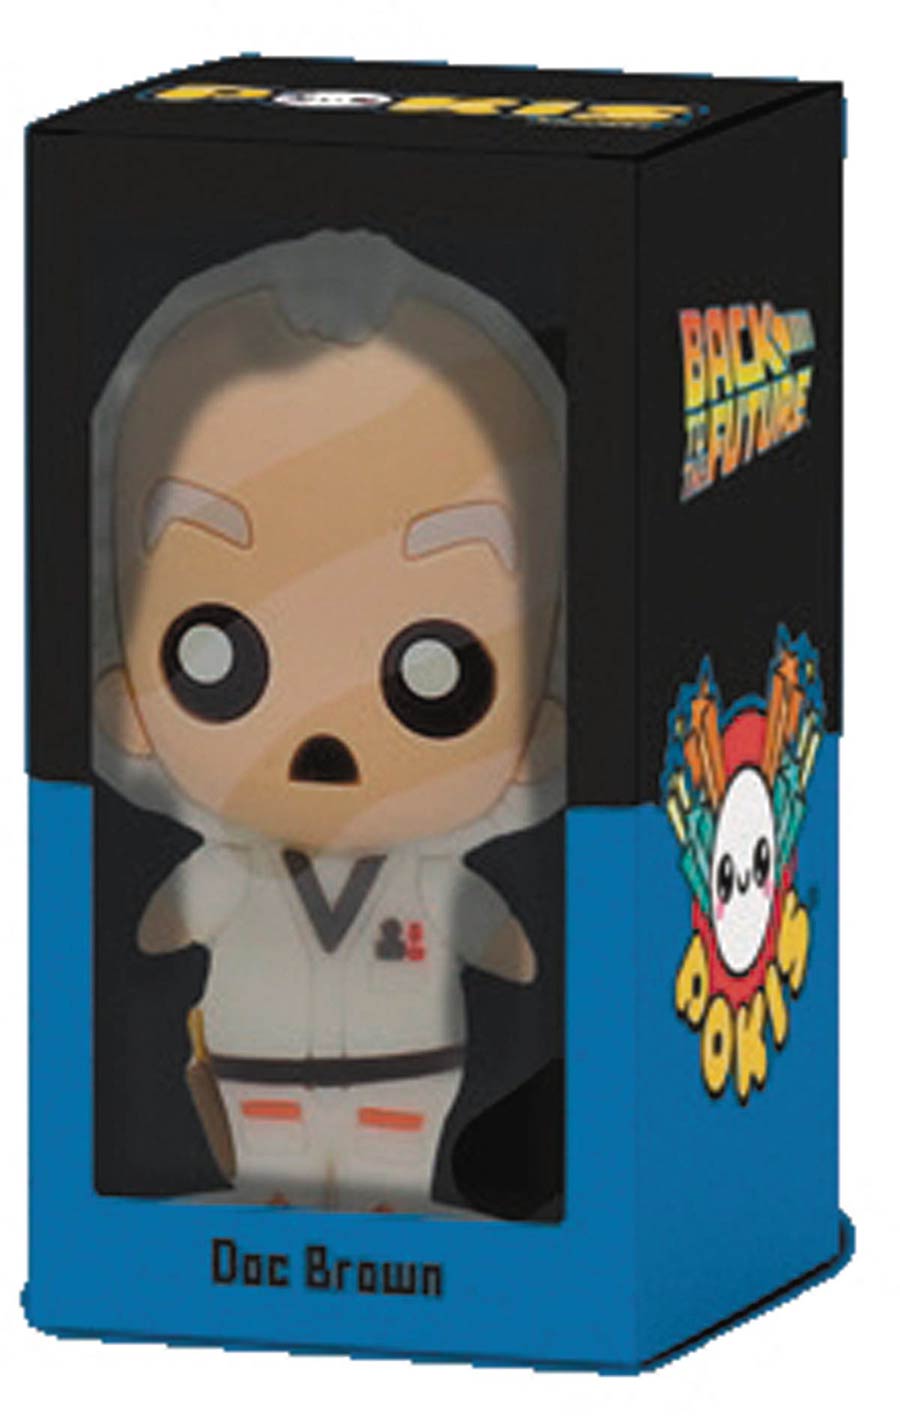 Pokis Back To The Future Boxed Figure - Doc Brown